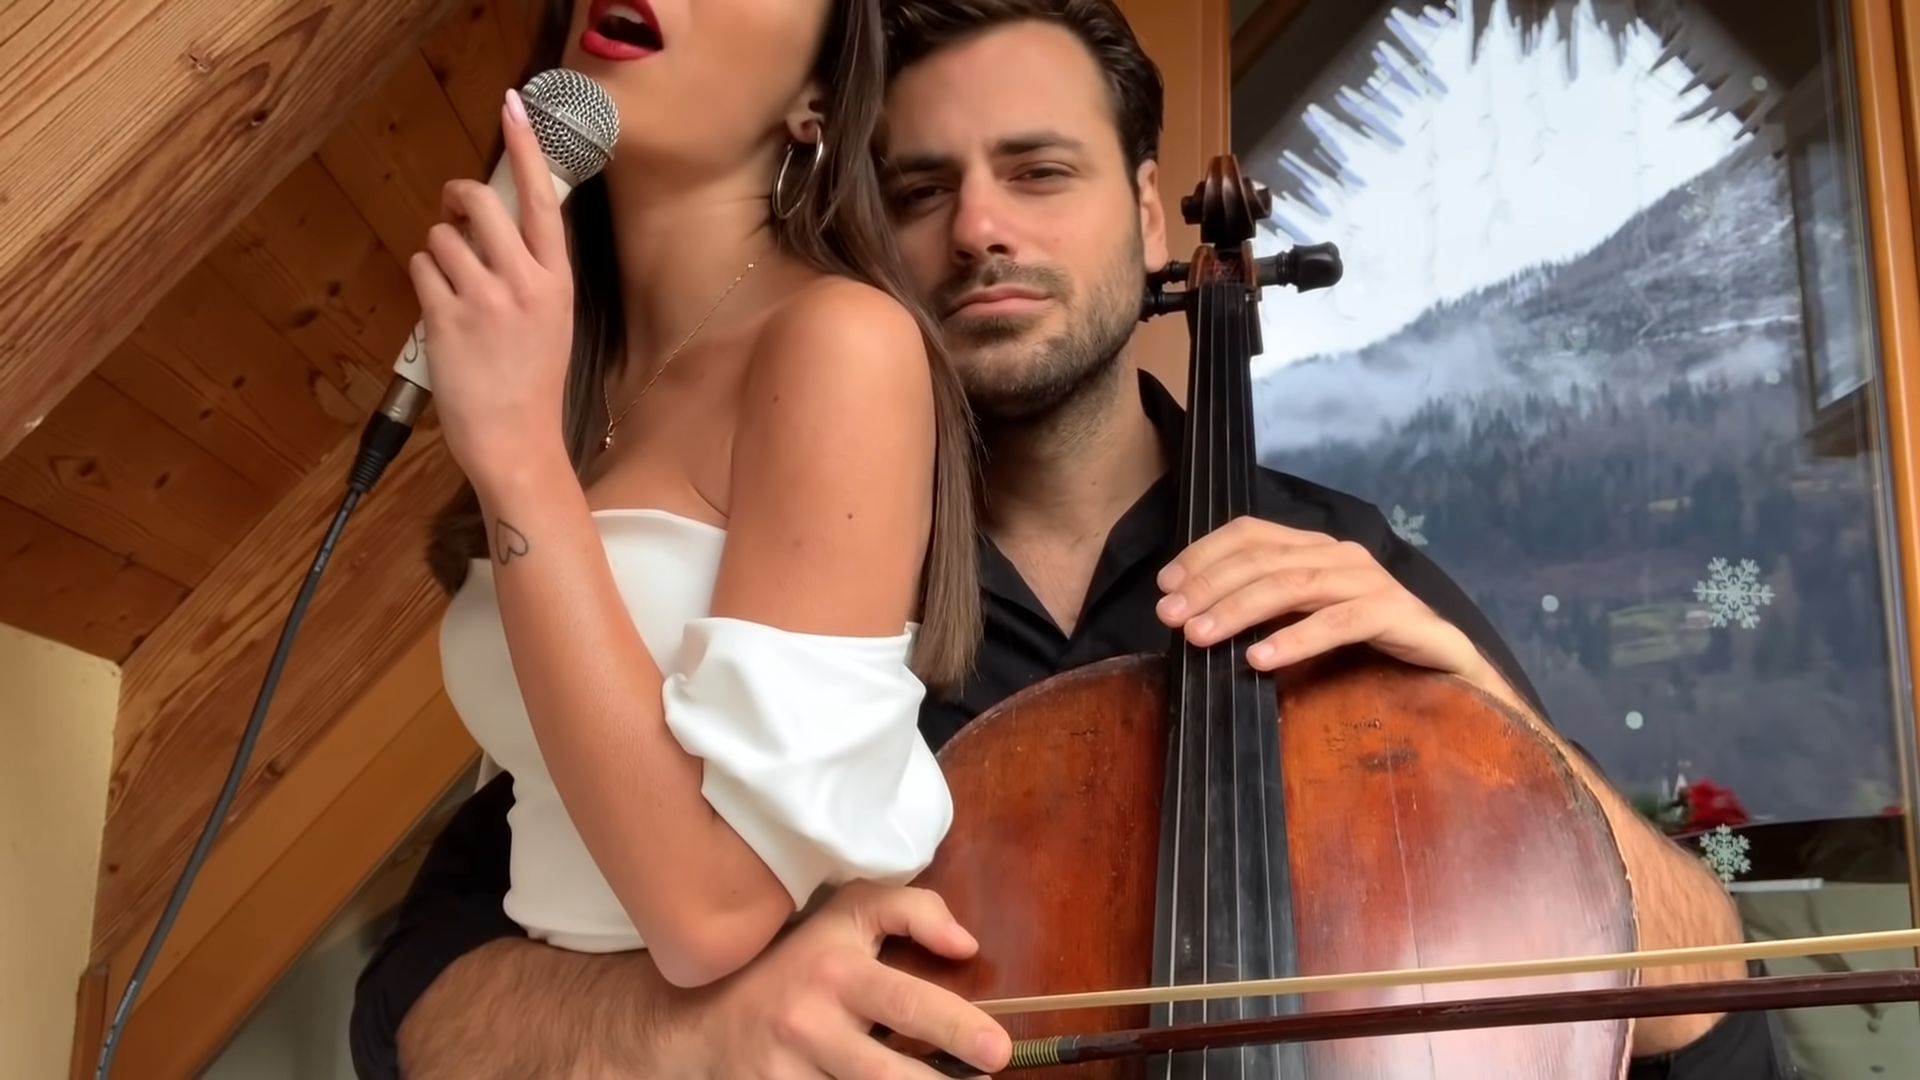 Hauser And Girlfriend Benedetta Caretta Perform Awesome Cover Songs